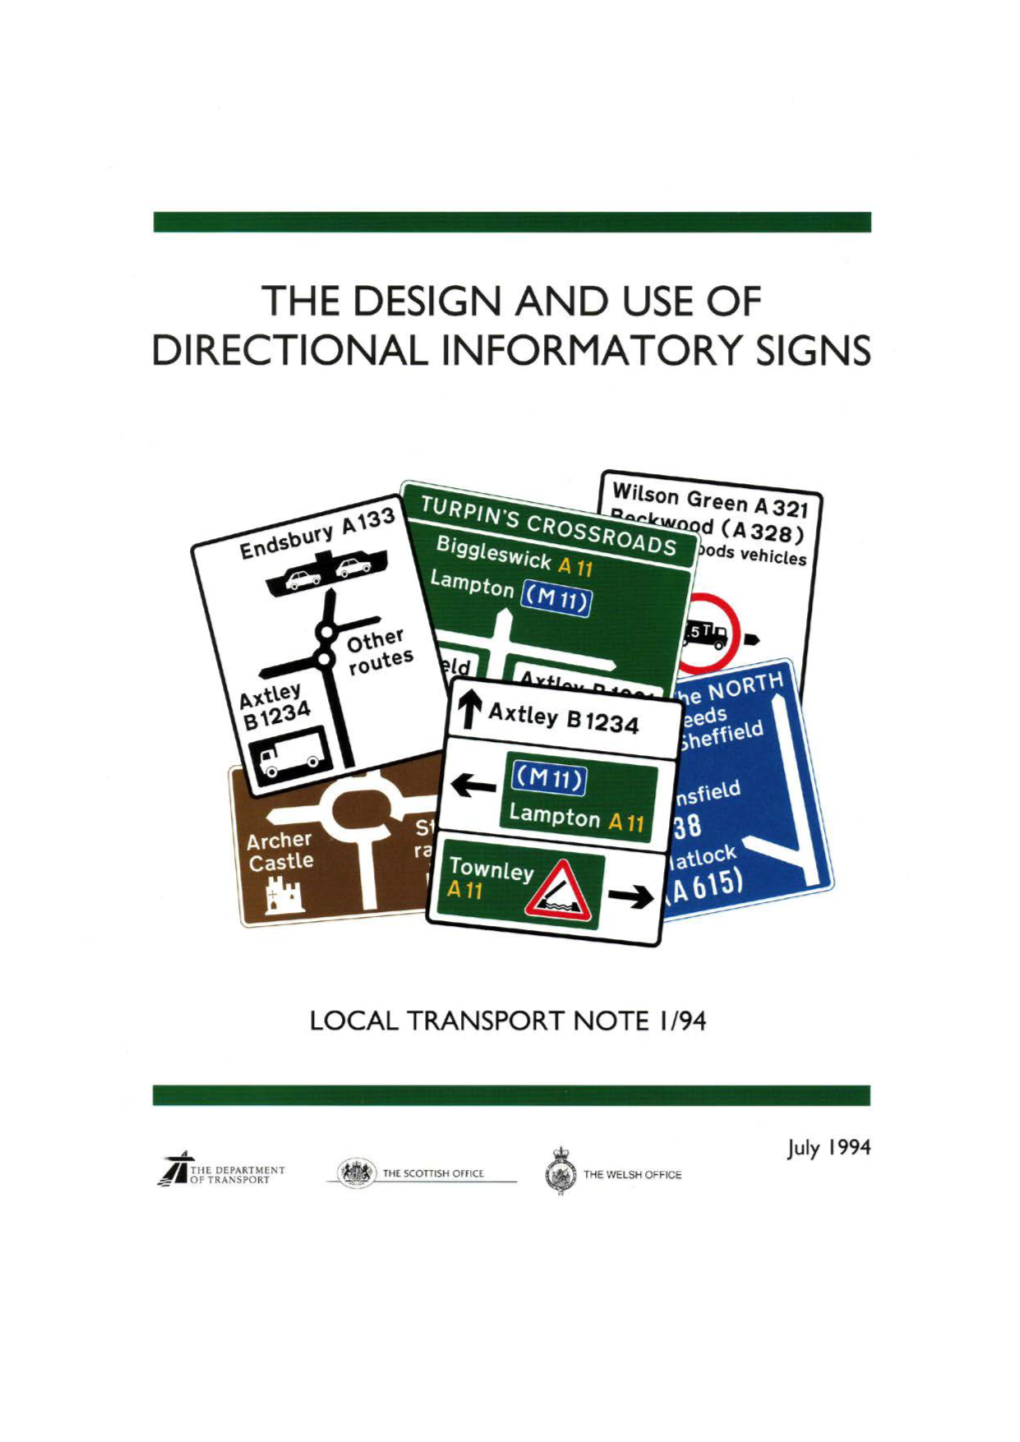 LTN 1/94 the Design and Use of Directional Informatory Signs